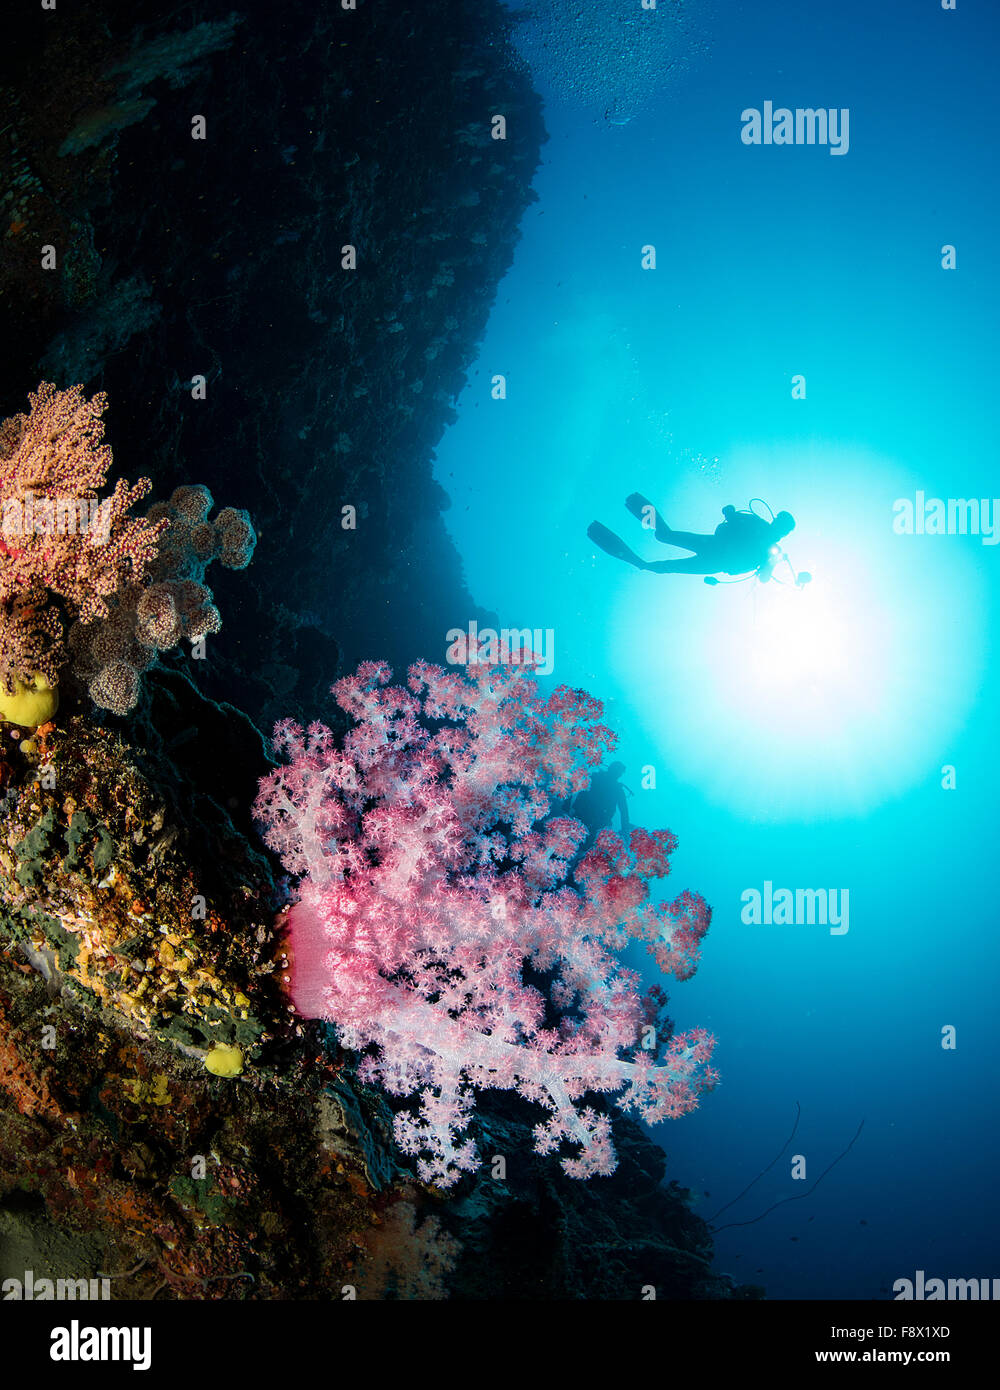 Diver silhouette behind soft coral. Stock Photo